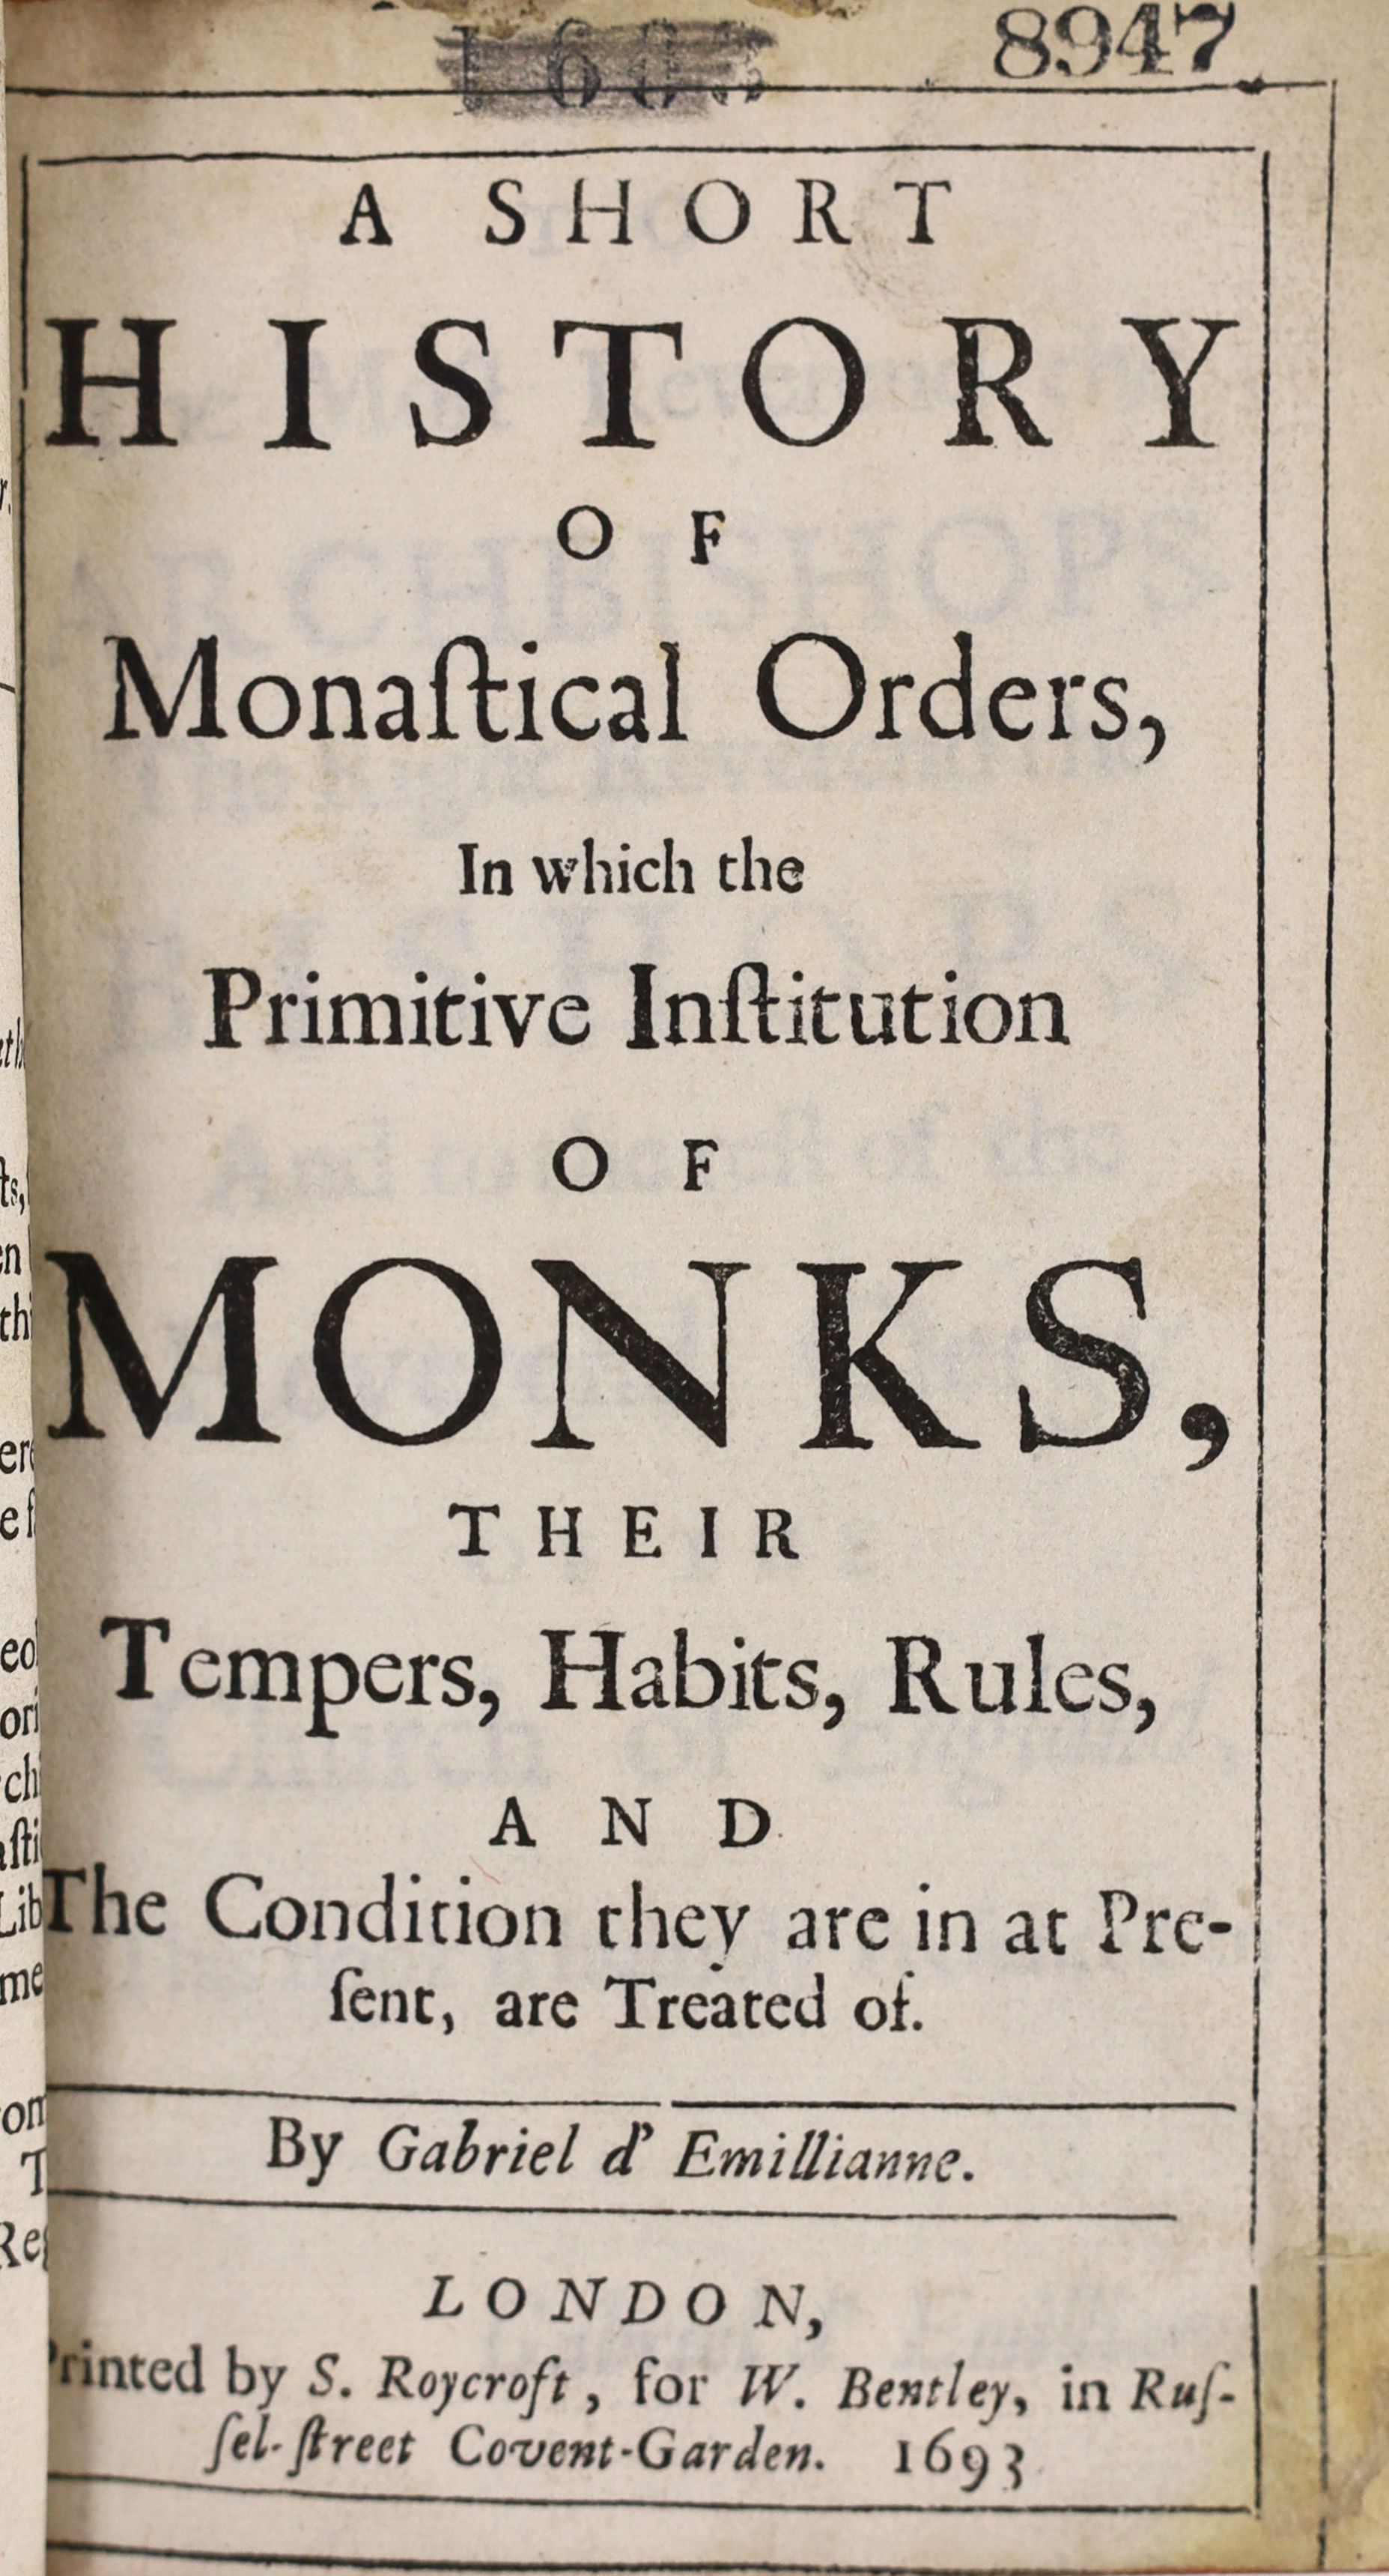 [Gavin, Antonio] - A Short History of Monastical Orders, in which the Primitive Institution of Monks, their Tempers, Habits, Rules…by Gabriel D’Emilliane, 8vo, original calf, rebacked, W. Bentley, London, 1693